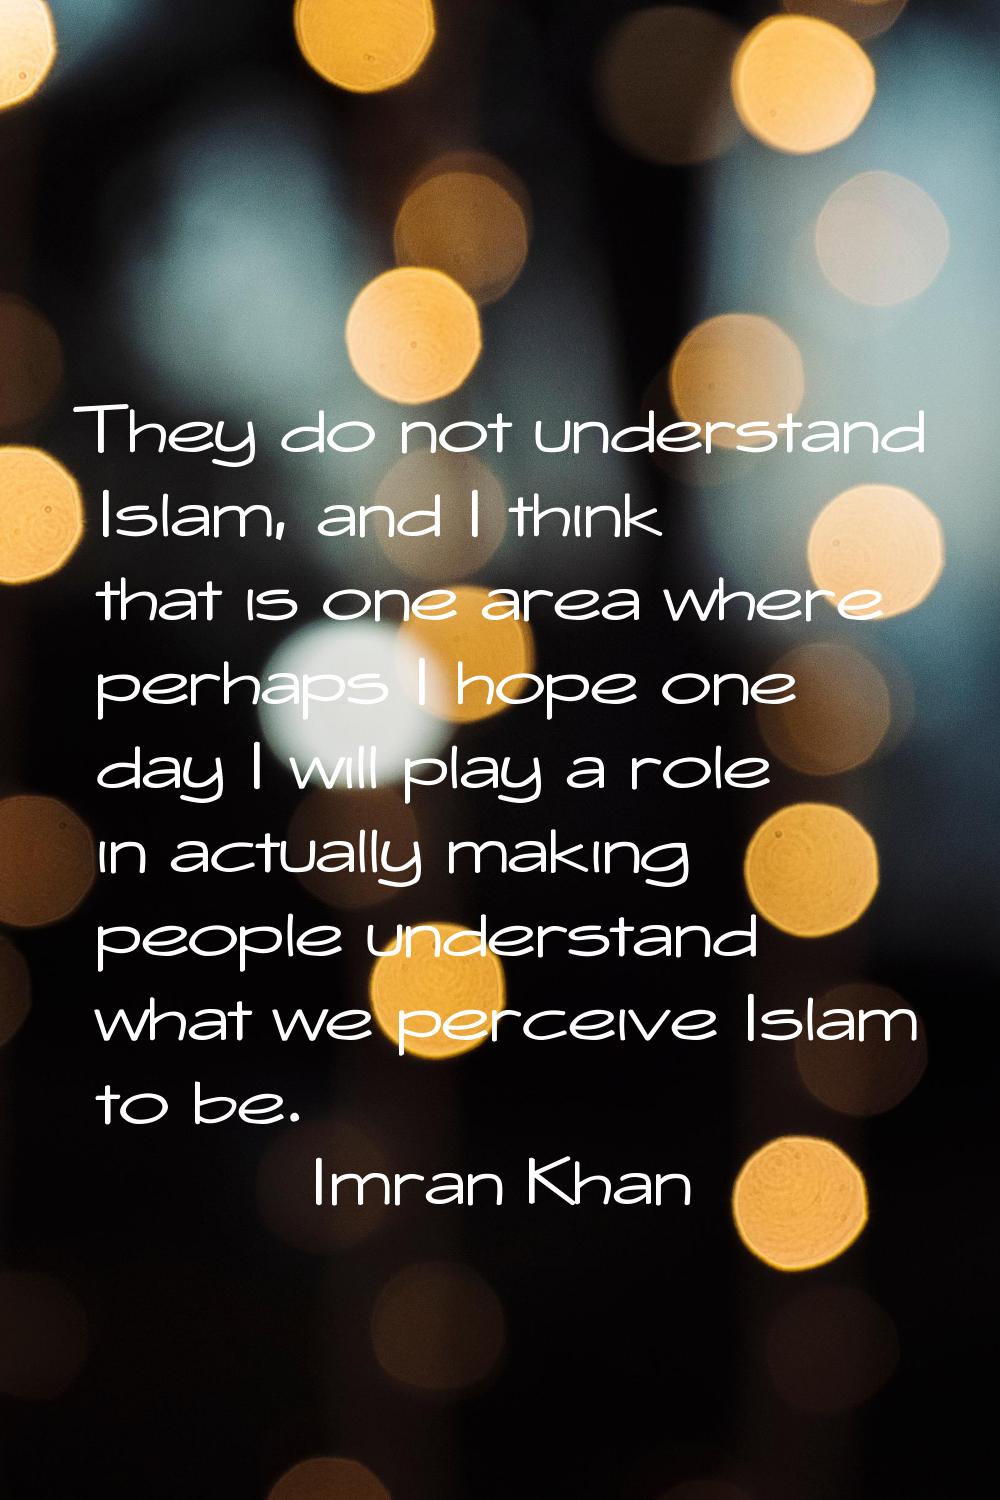 They do not understand Islam, and I think that is one area where perhaps I hope one day I will play